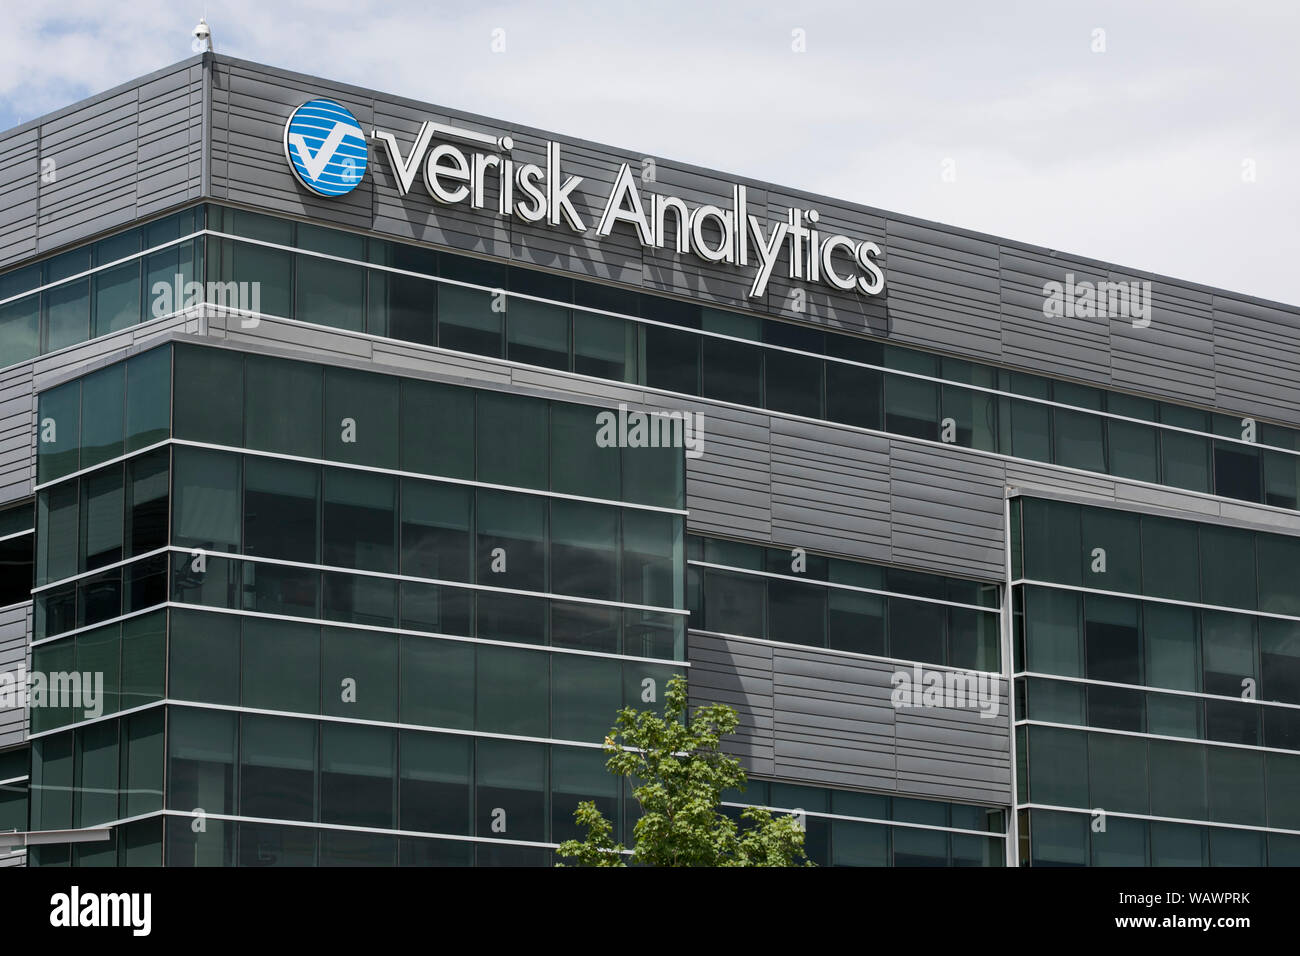 A logo sign outside of the headquarters of Verisk Analytics in Lehi, Utah on July 27, 2019. Stock Photo